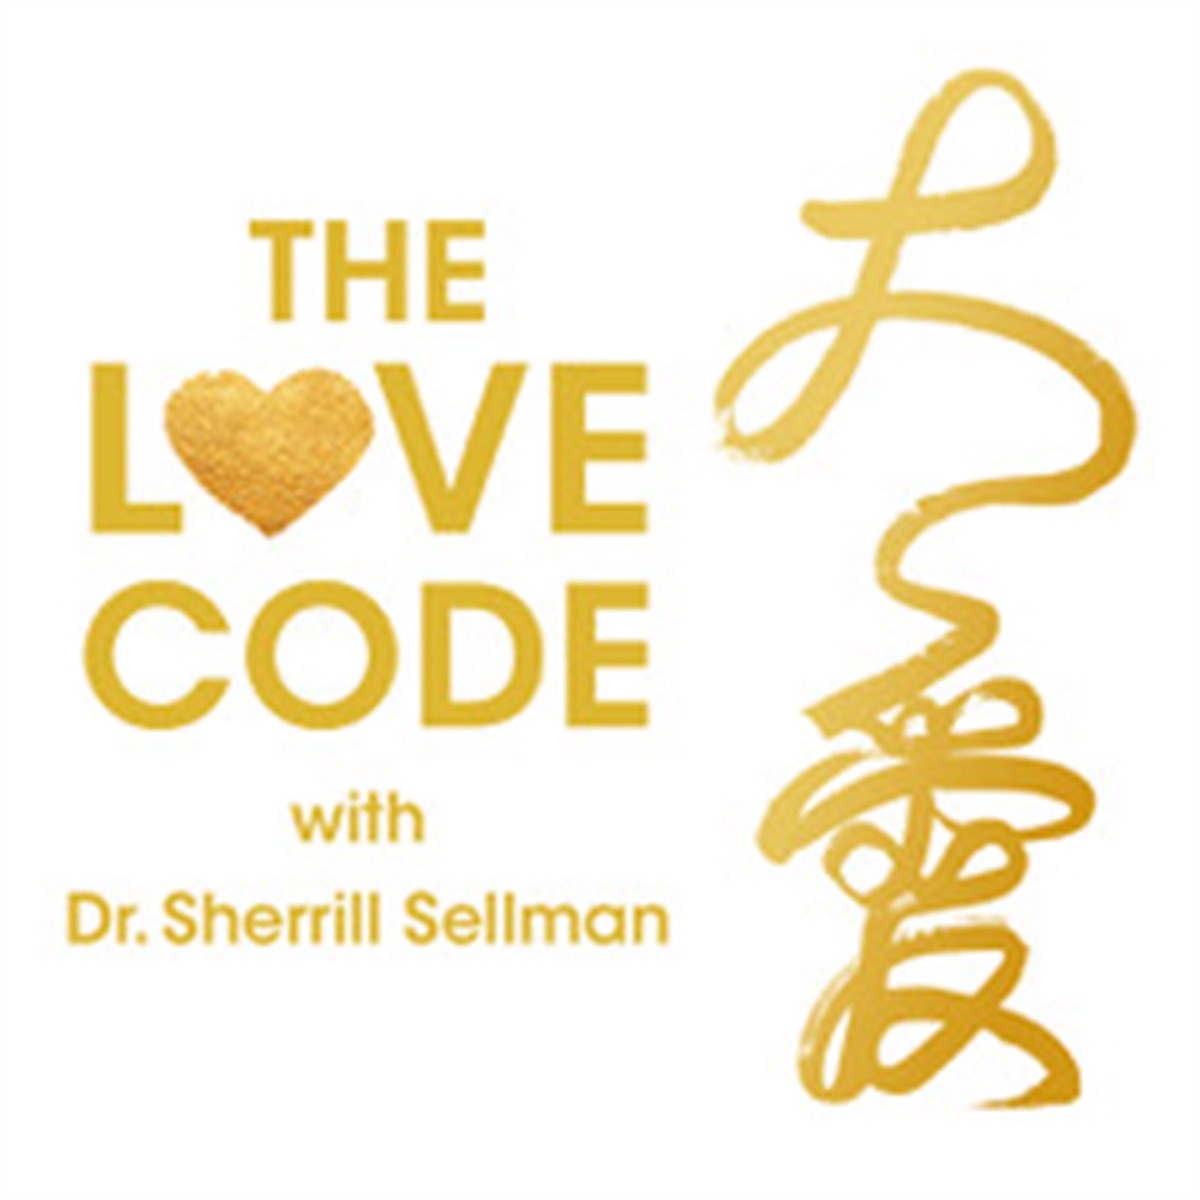 Love code. Lovely code. Coders Love. A code for Love. Лов код